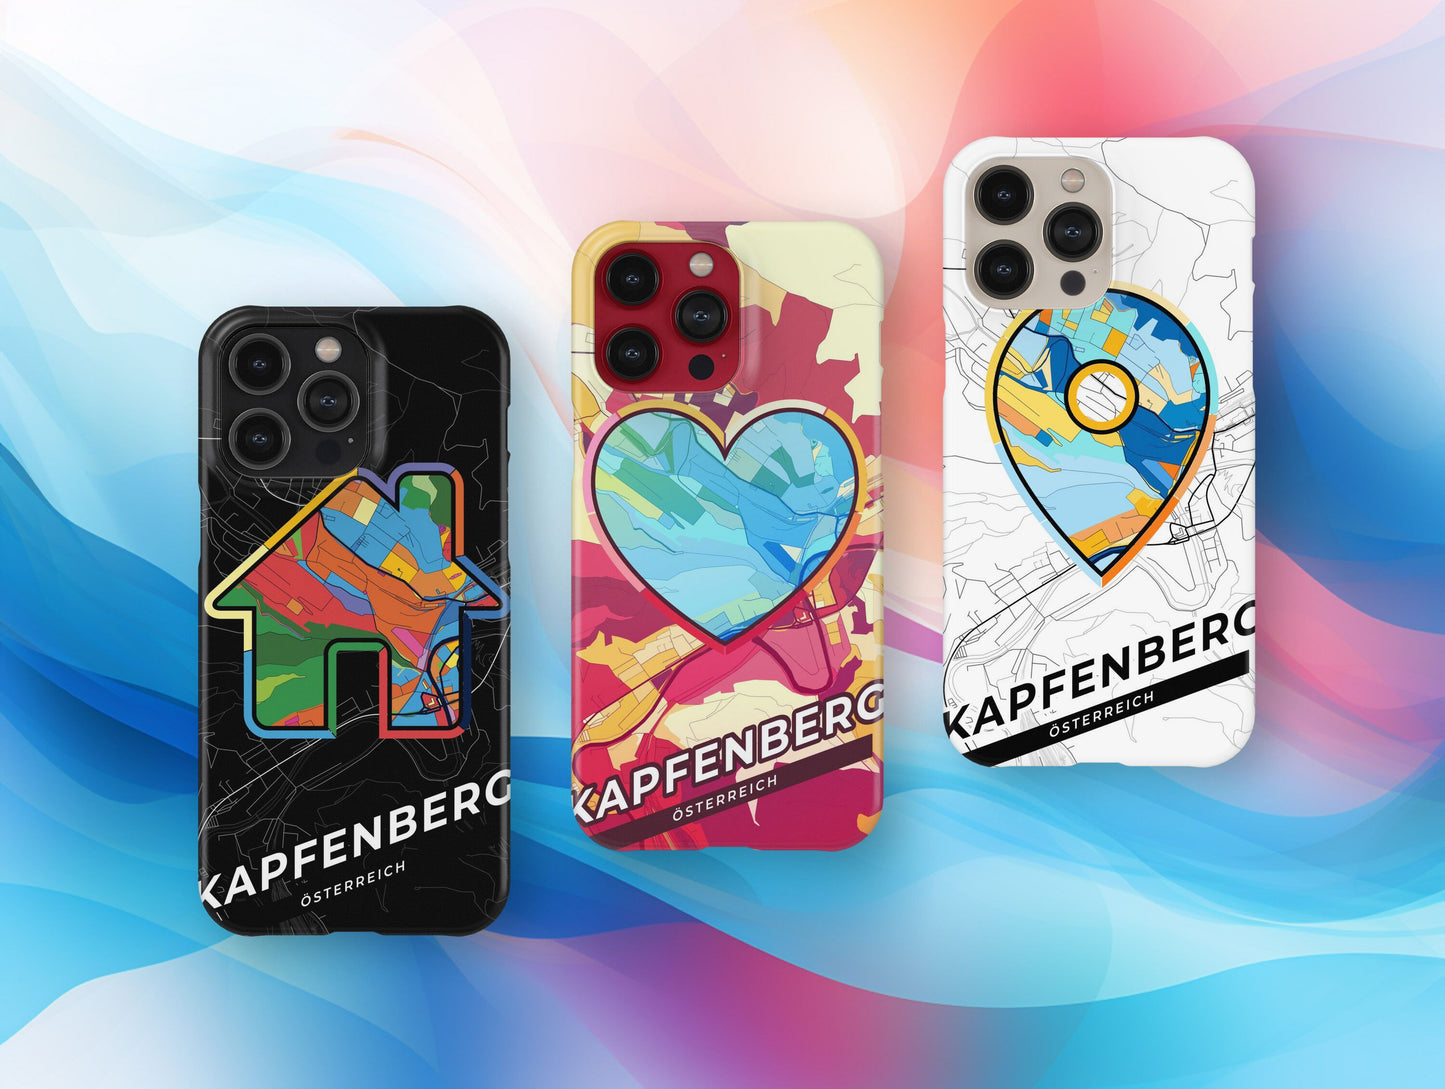 Kapfenberg Österreich slim phone case with colorful icon. Birthday, wedding or housewarming gift. Couple match cases.